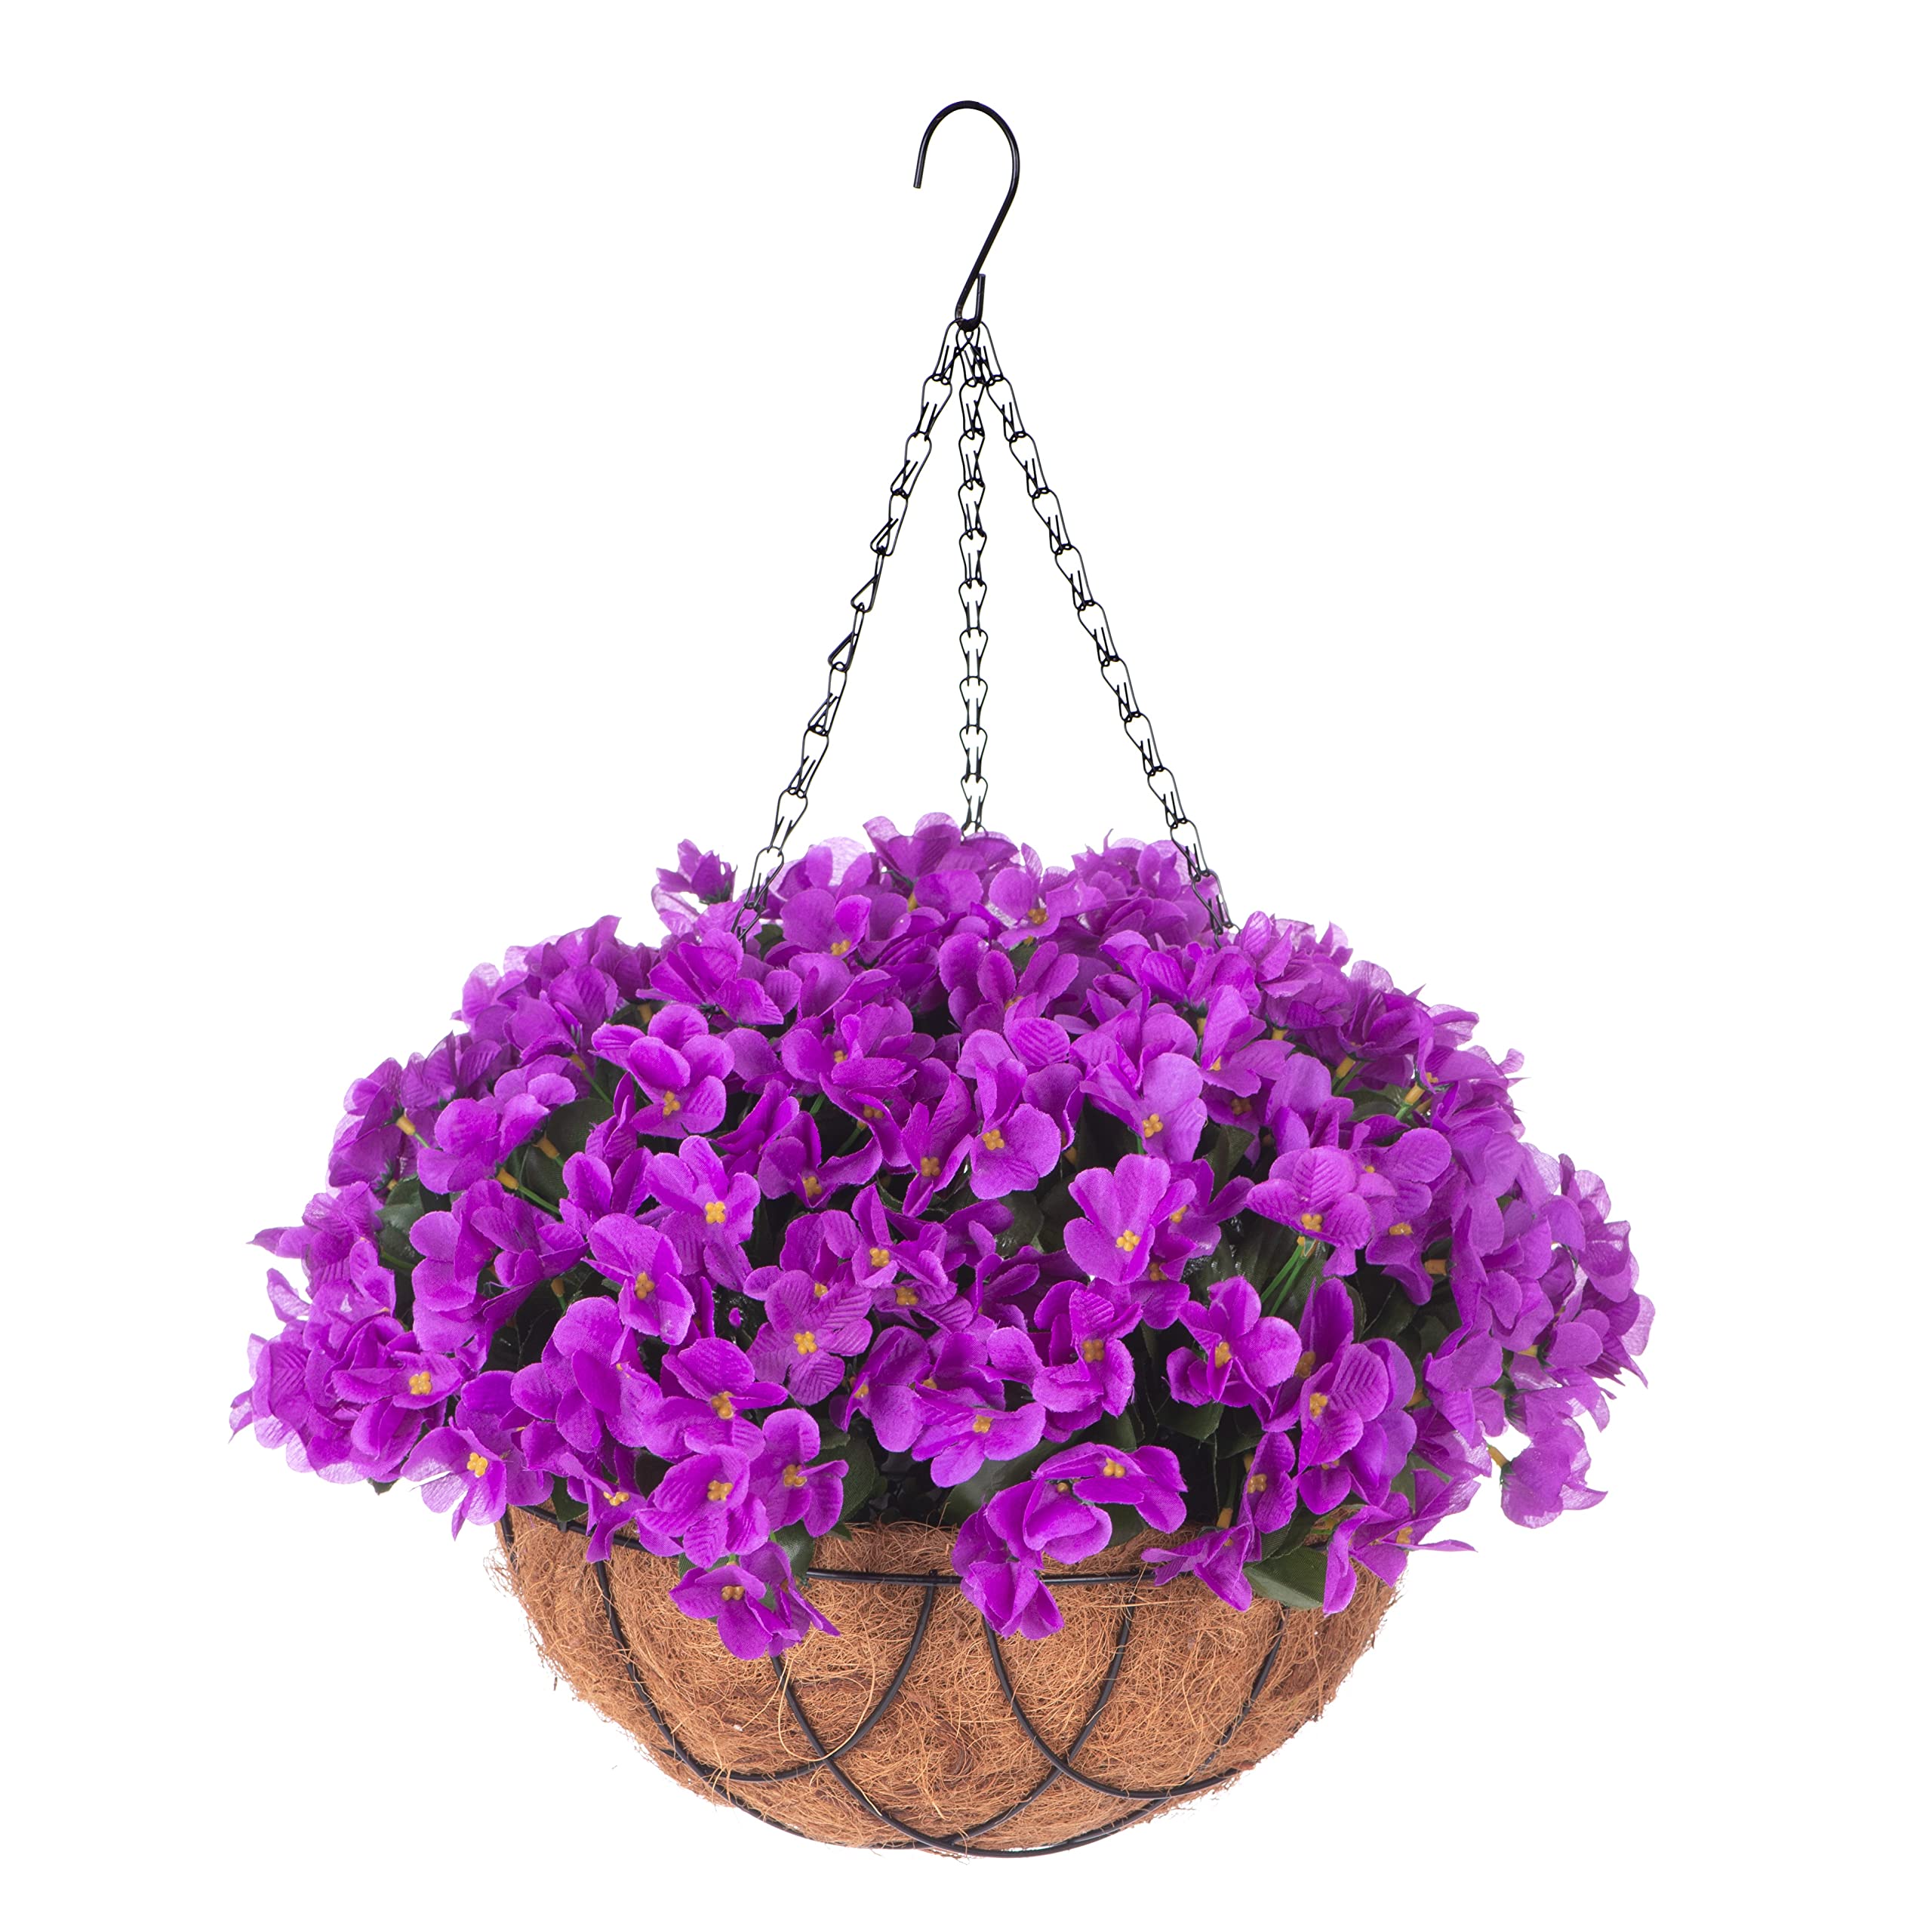 Artificial Flowers with HangingBasket for Outdoor Indoor,Fake Hydrangea Flowers in Coconut Lining Hanging Basket for Home Courtyard Decoration,4 Branches Hydrangea Flowers in 12'' Basket(Purple)